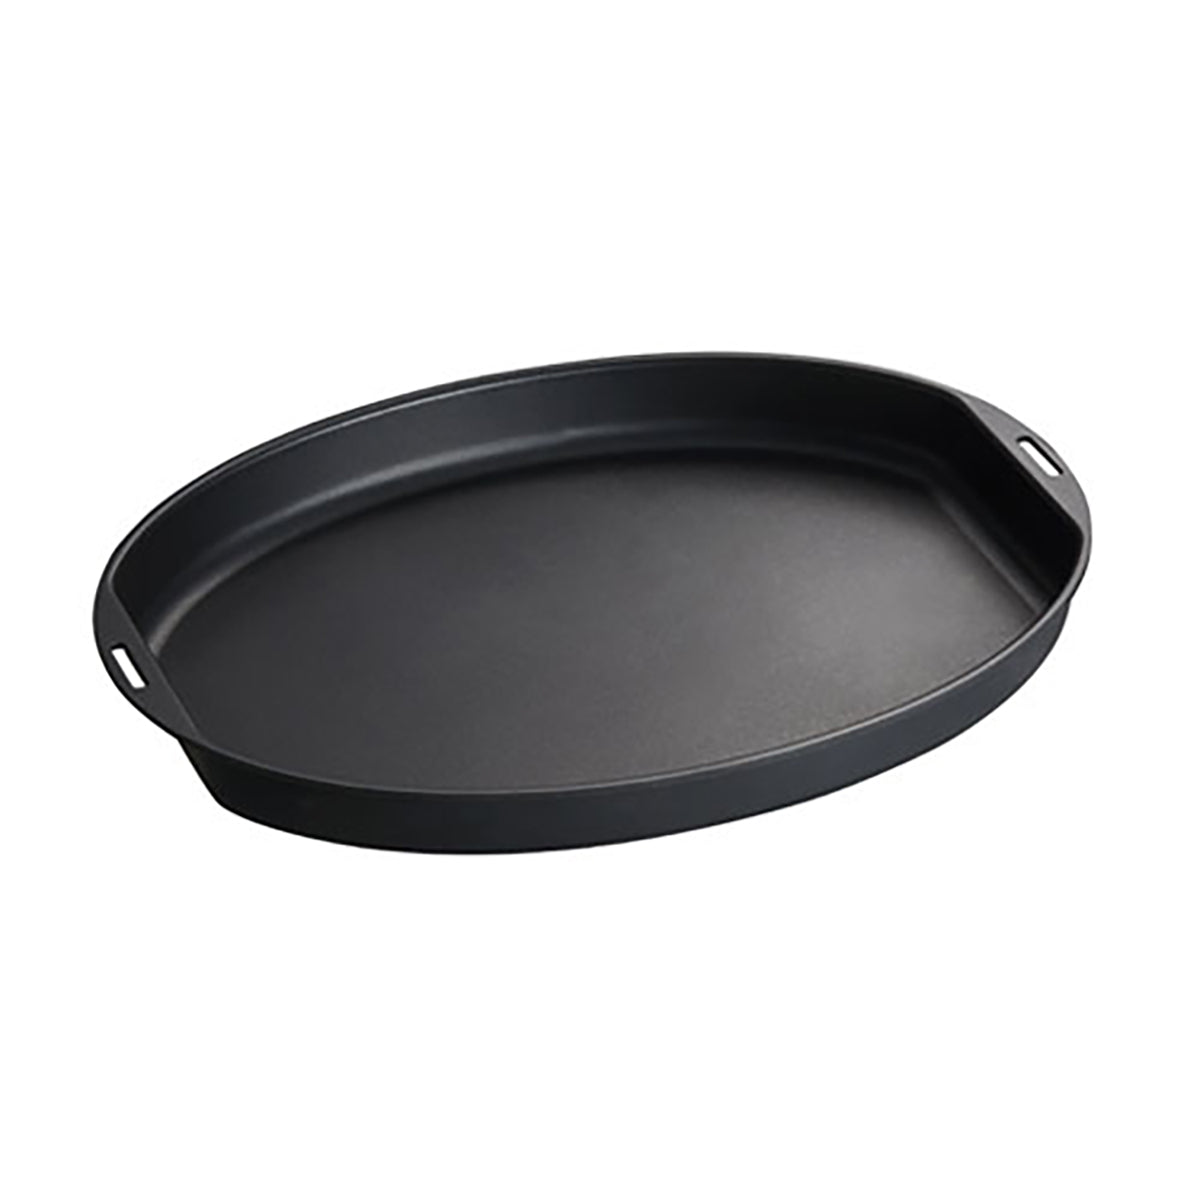 BRUNO Flat Plate (for Oval Hot plate / Replacement)